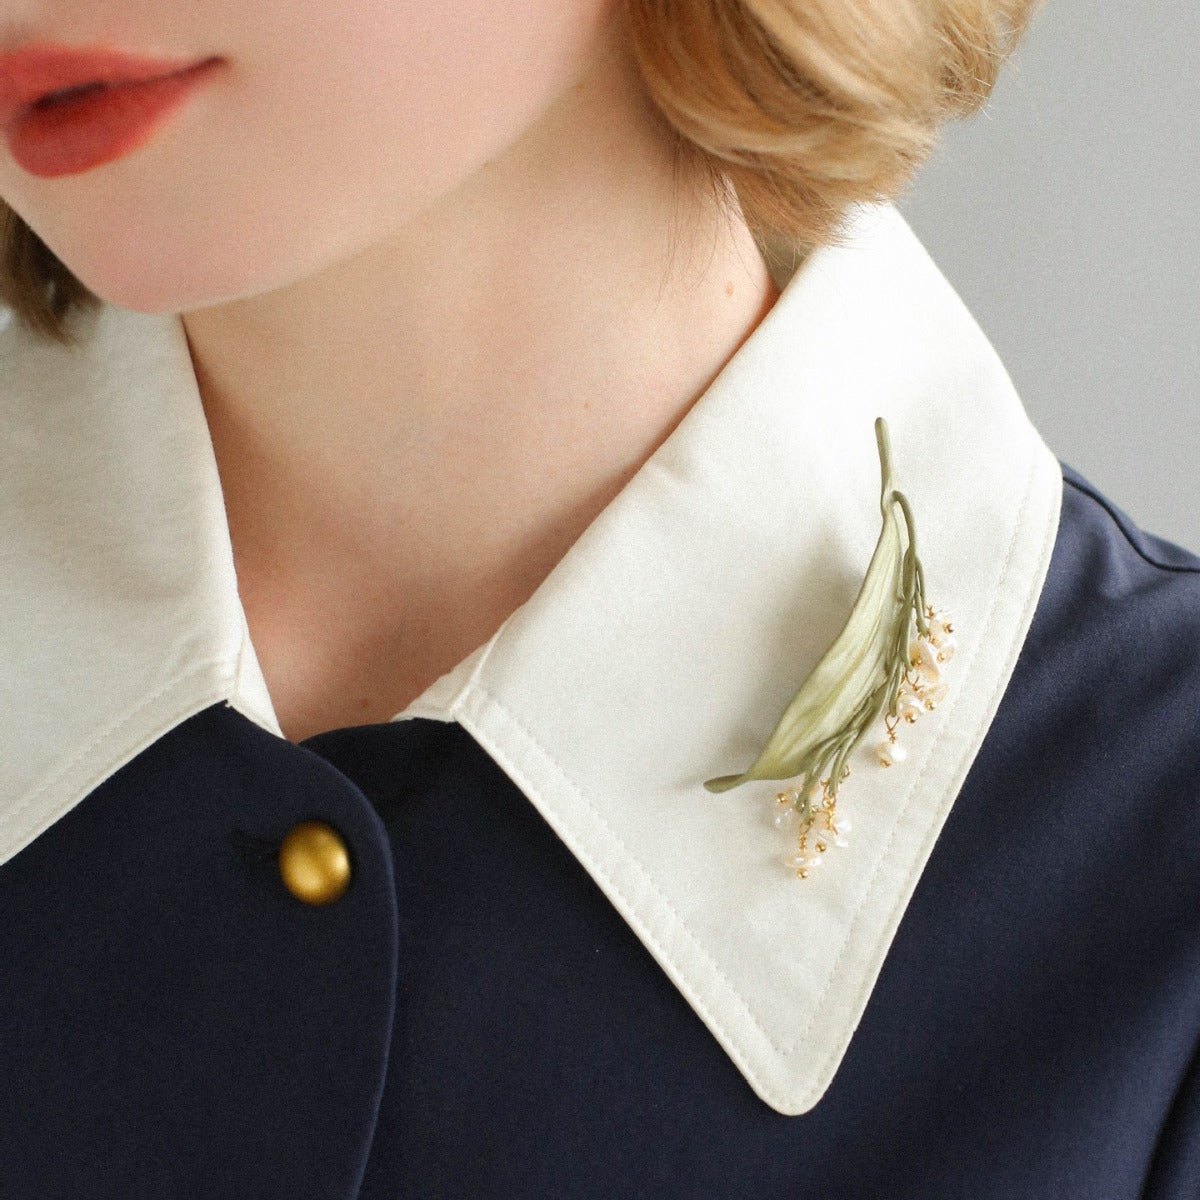 Pastoral Style Leaves and Daisy Pearl Brooch - floysun